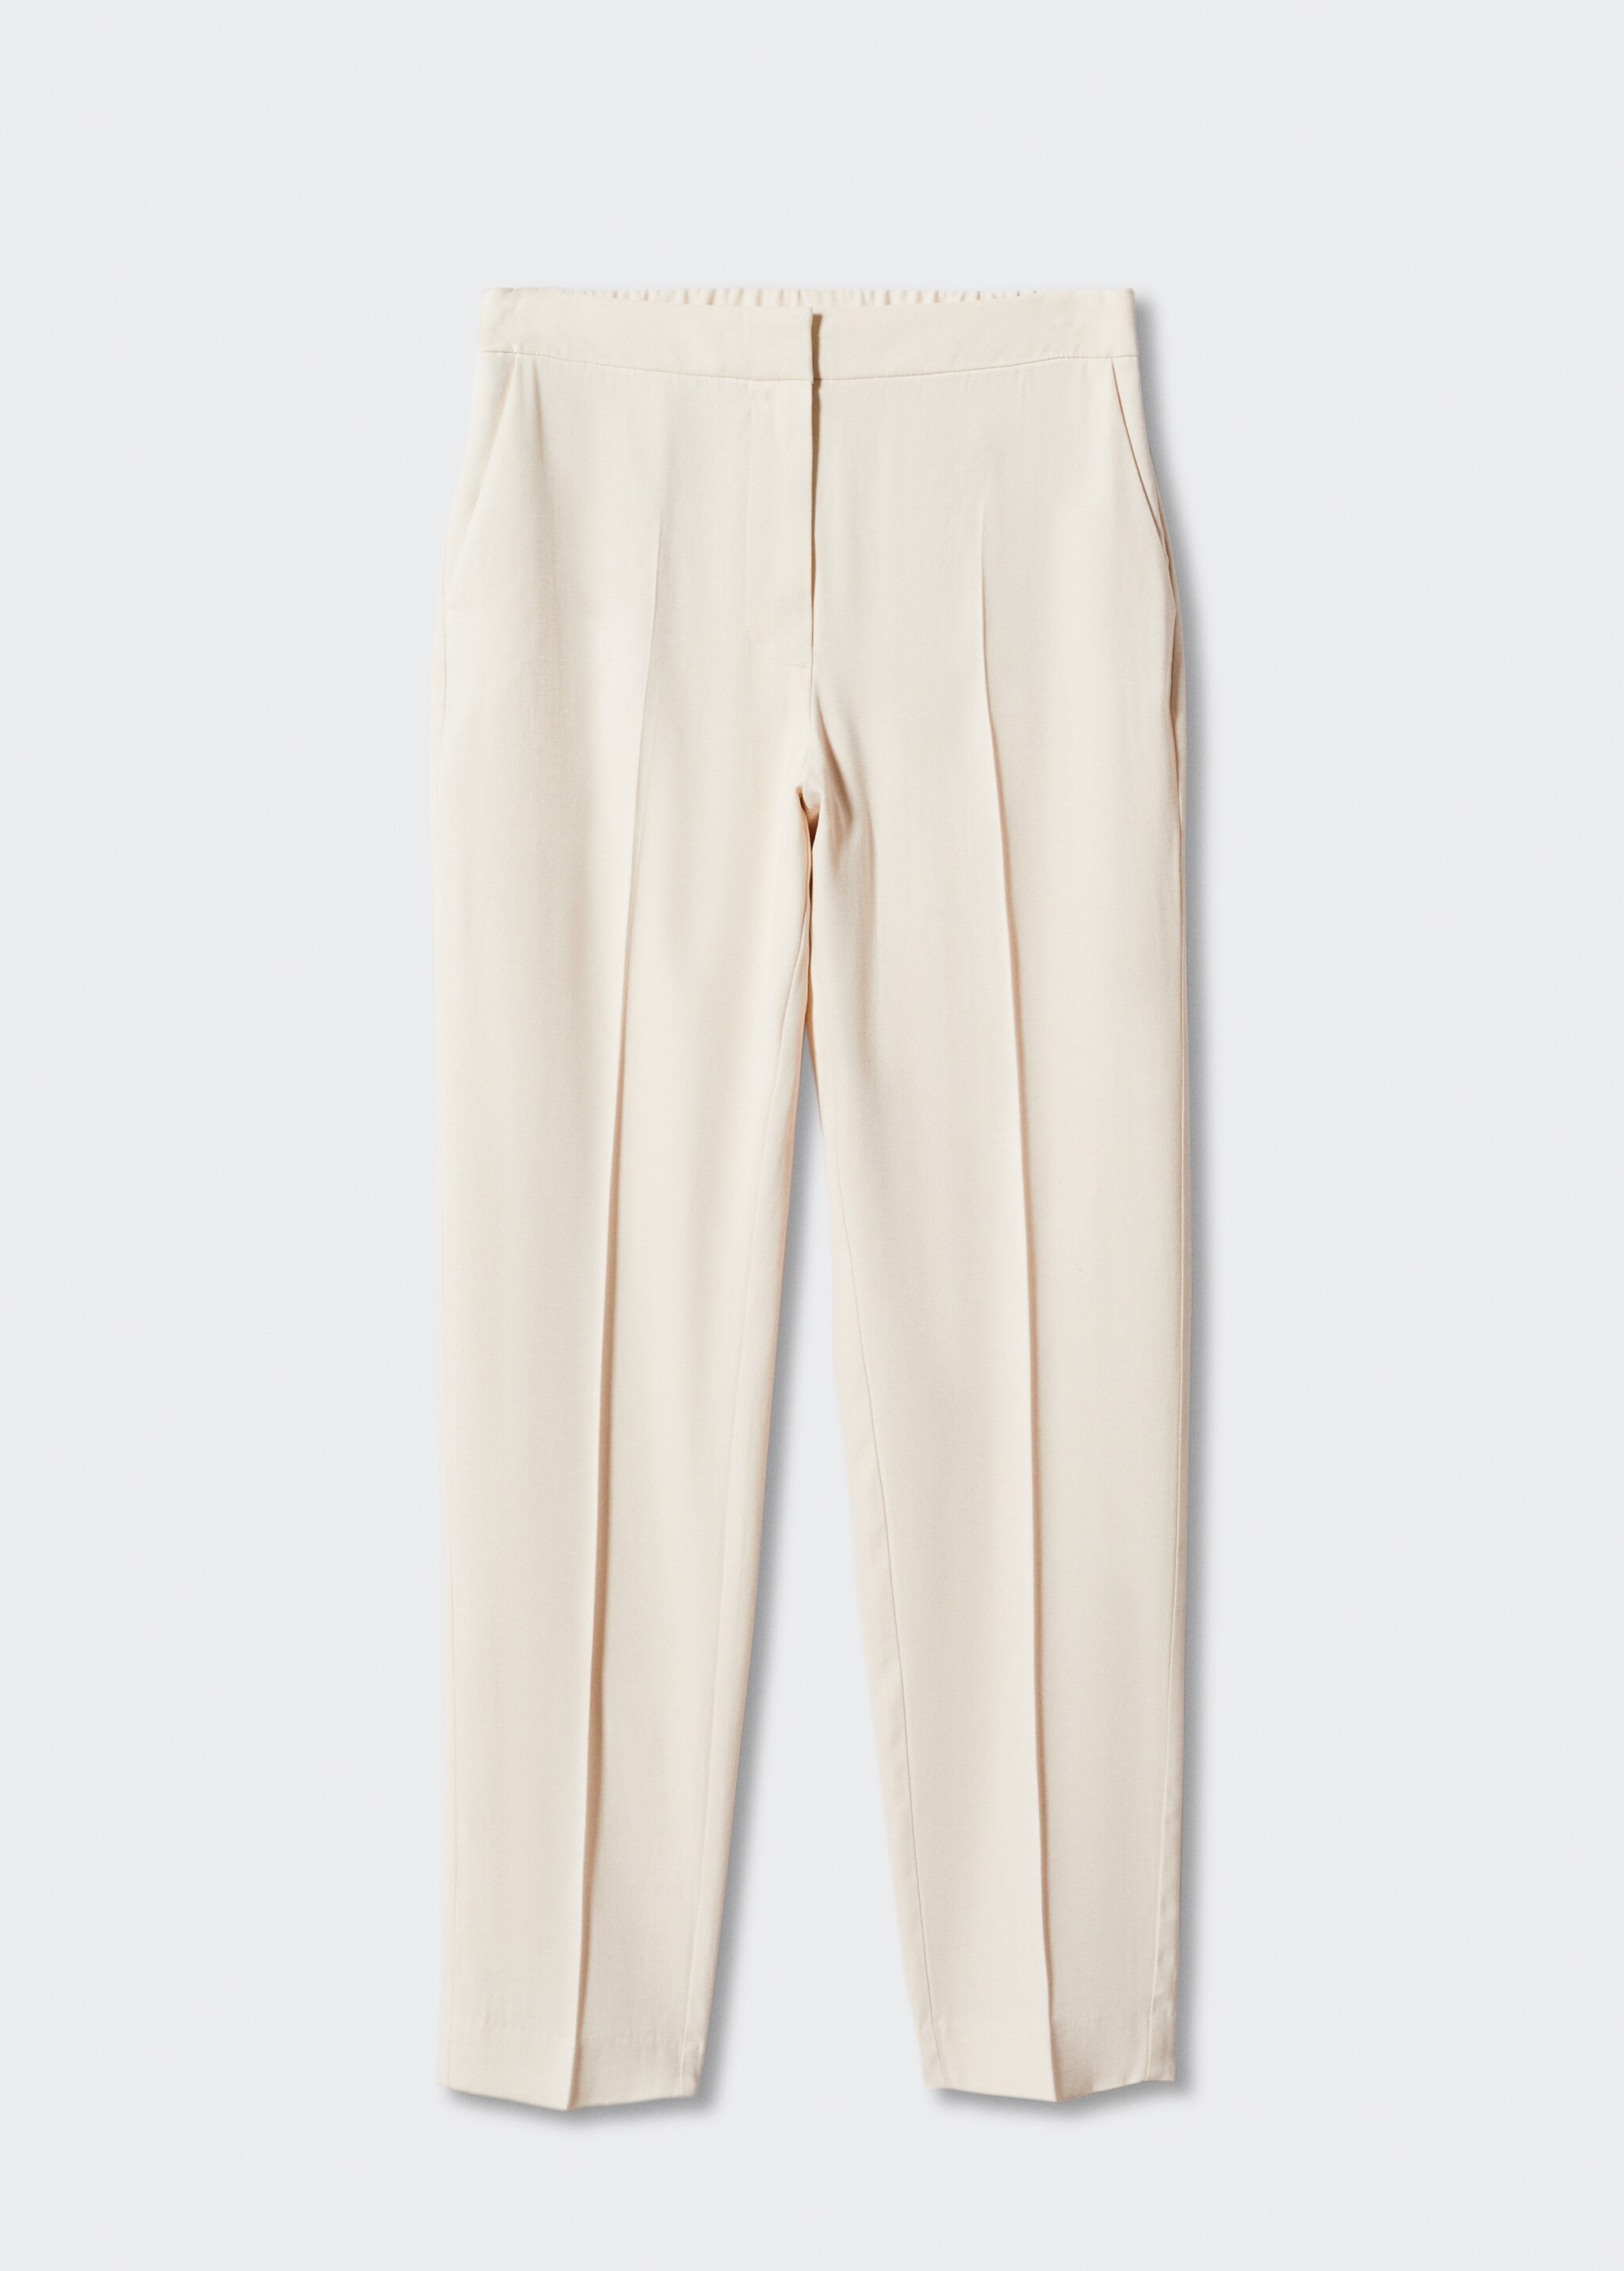 Straight suit pants - Article without model